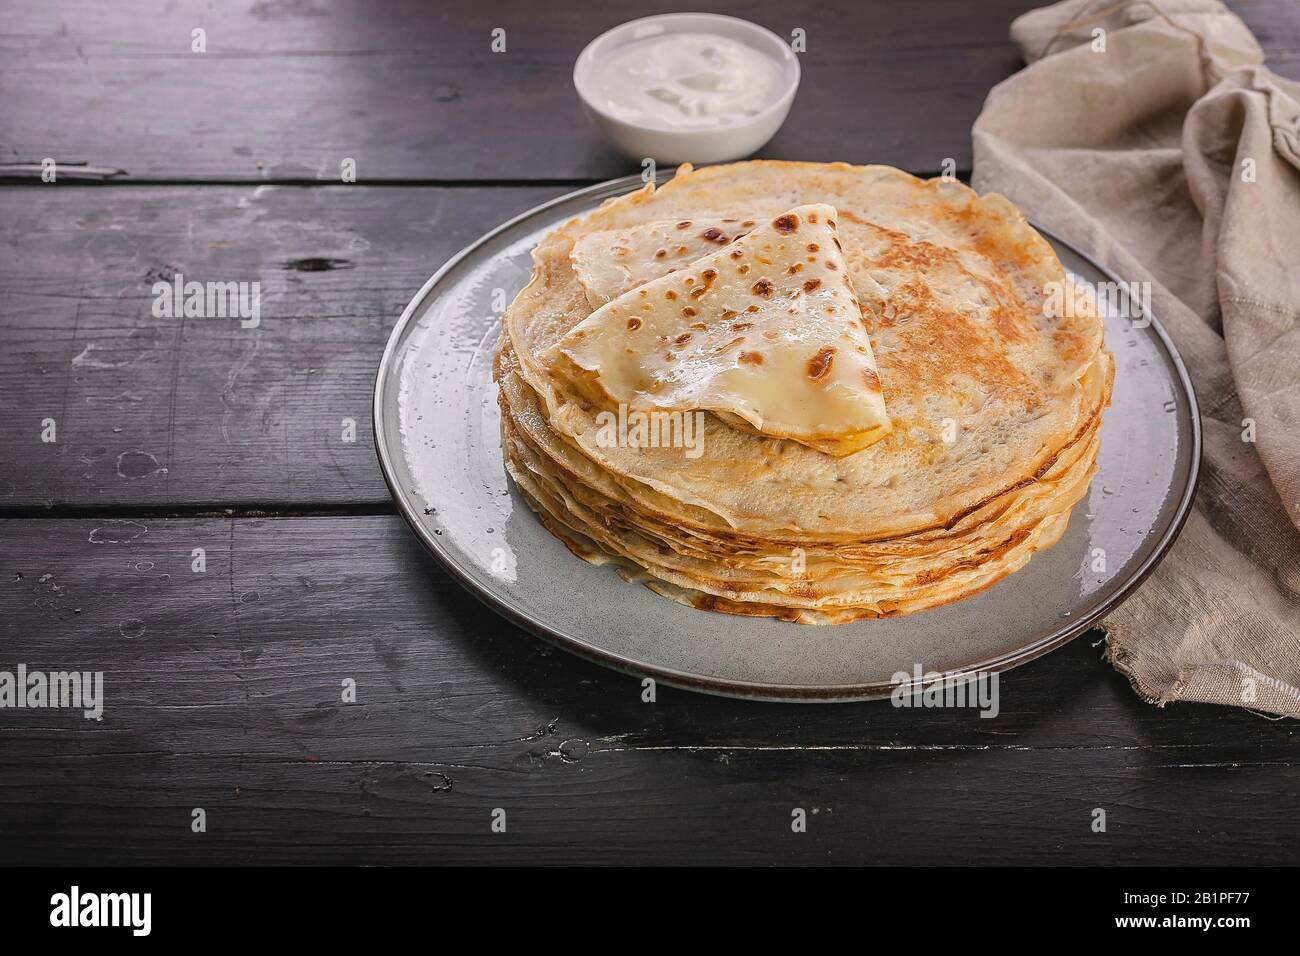 A stack of pancakes on a plate. Slavic national holiday Maslenitsa. Copy space Stock Photo